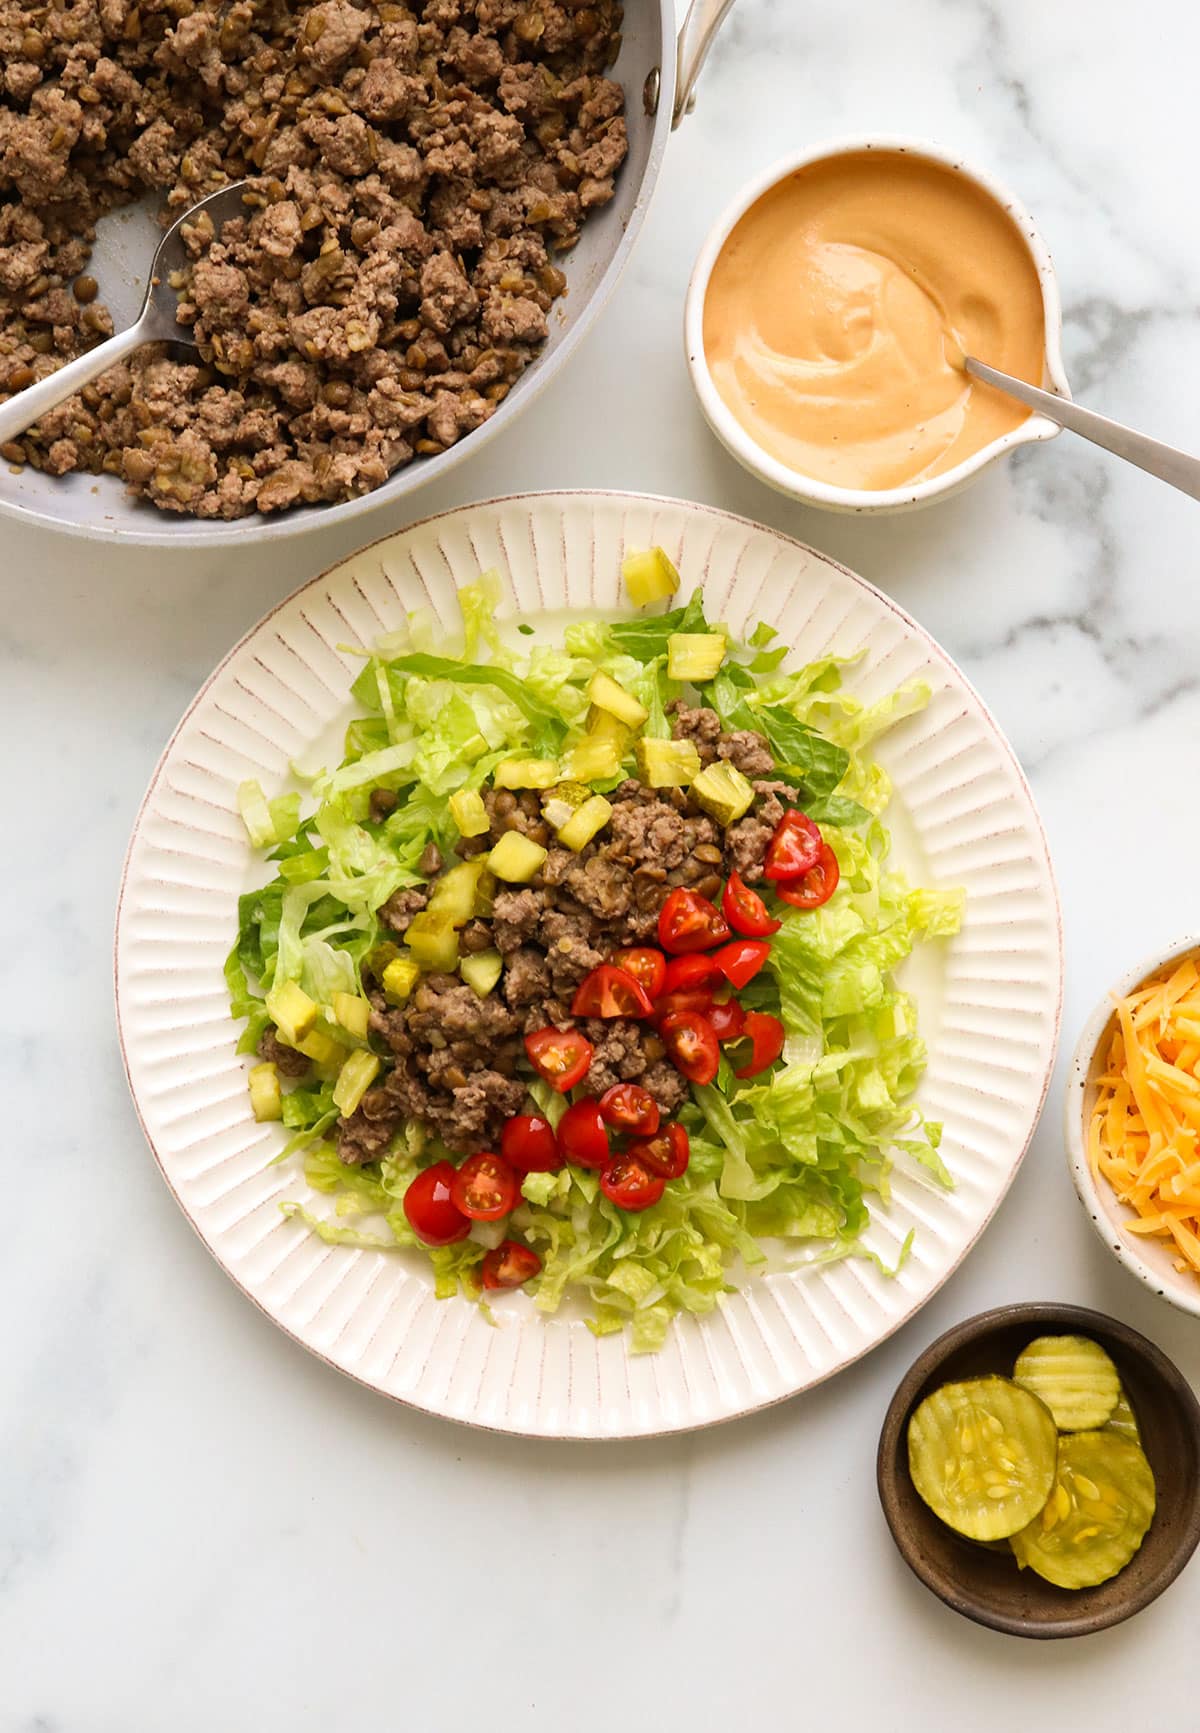 salad topped with burger crumbles, diced pickles, tomatoes, and sauce on the side.